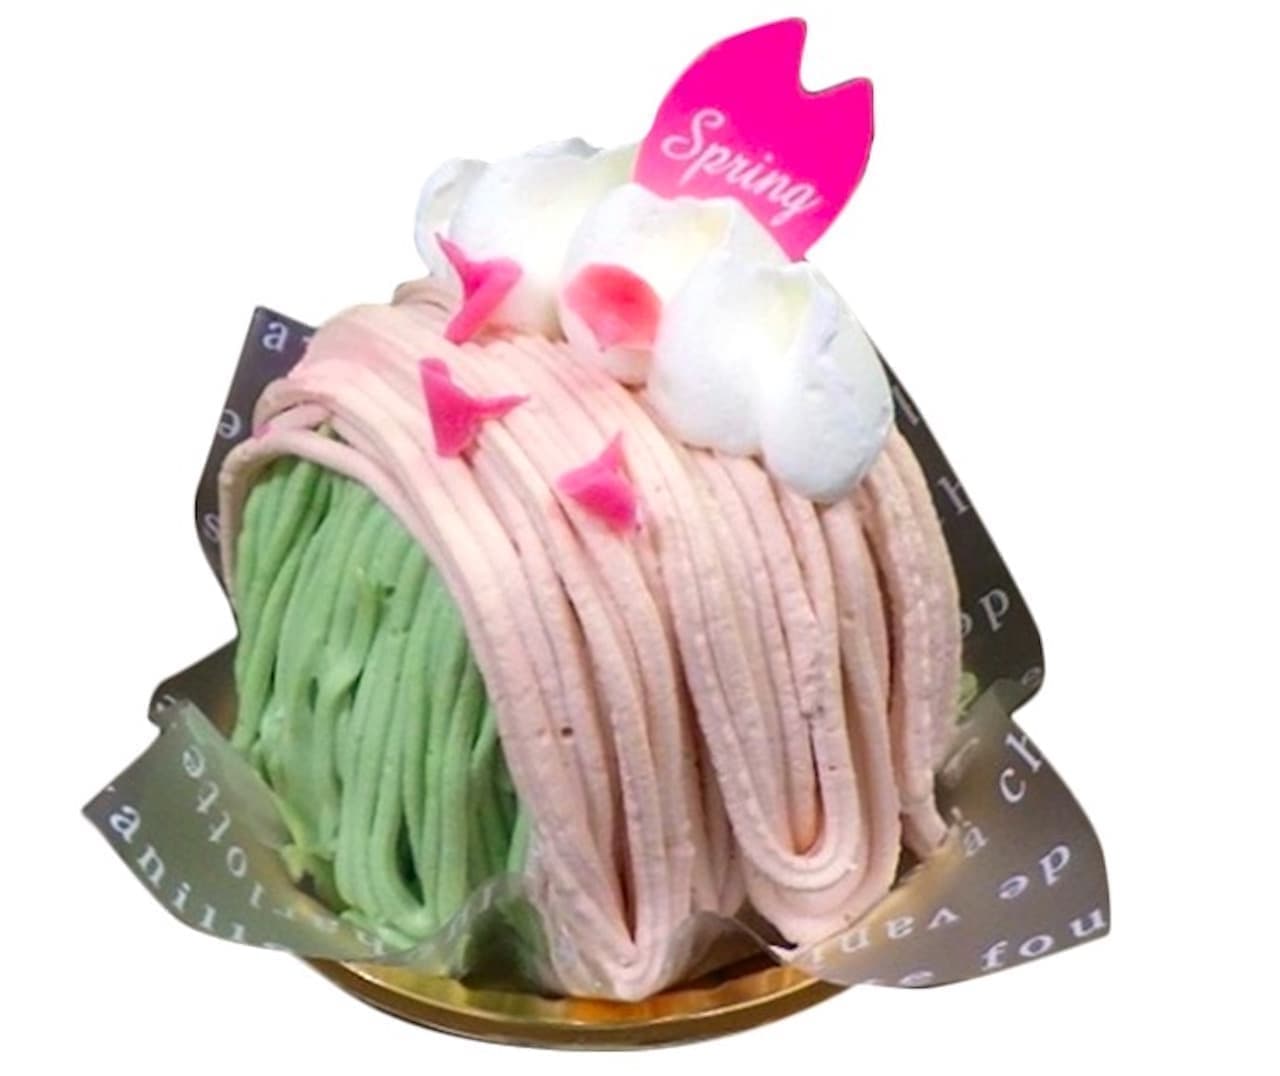 Chateraise "Spring Cherry Blossoms and Uji Matcha Mont Blanc"